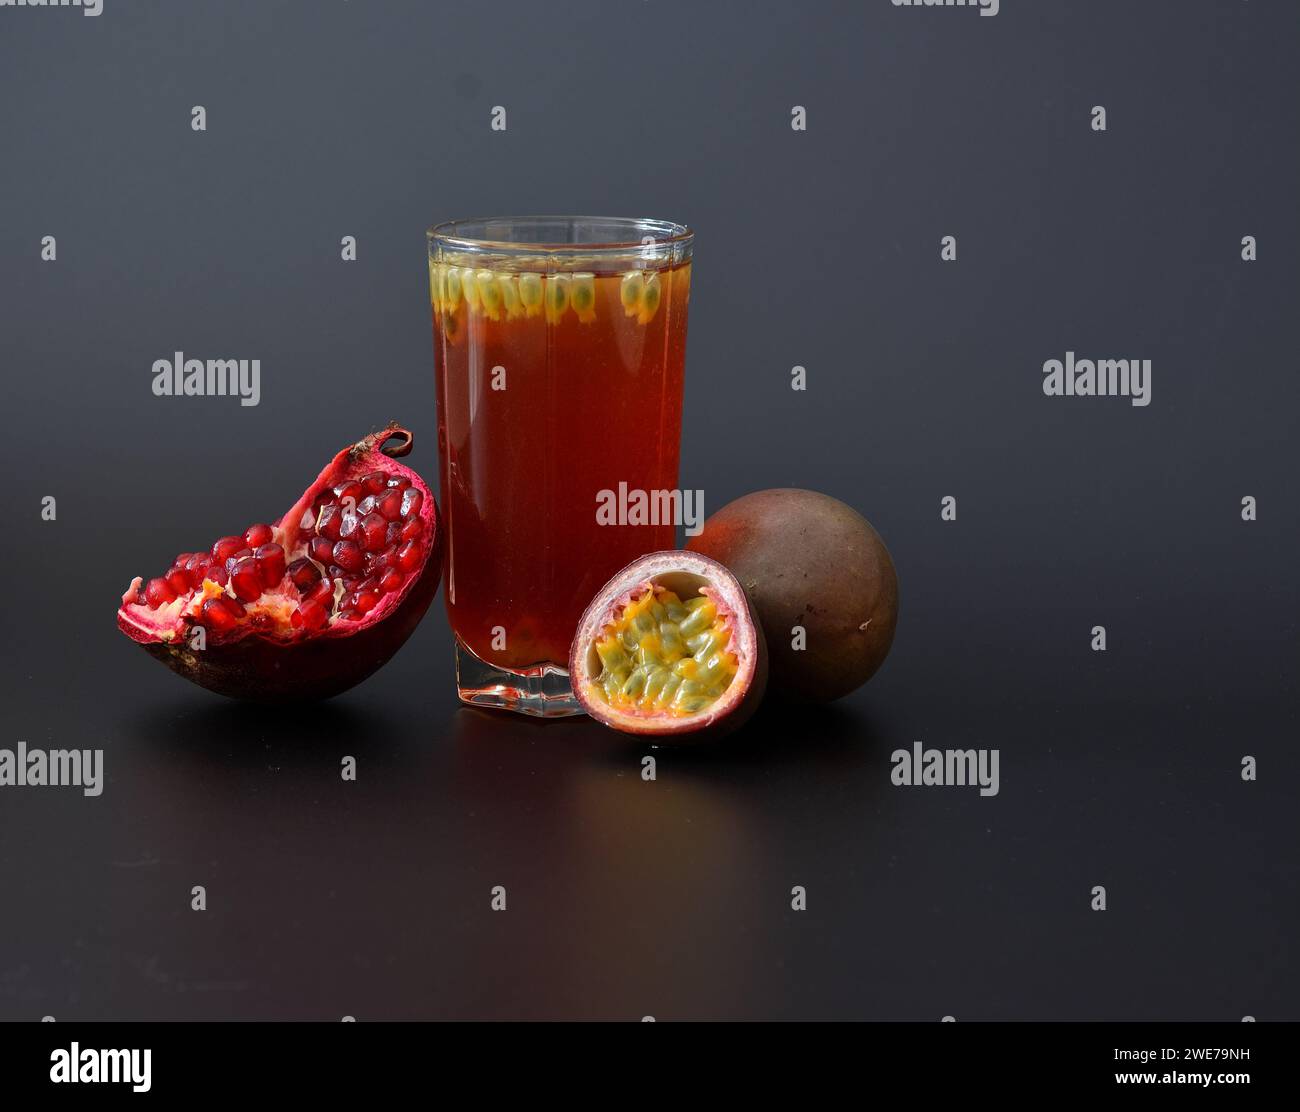 A glass of fruit juice with seeds on a black background, next to a ripe passion fruit and a pomegranate fruit with seeds. Close-up. Stock Photo